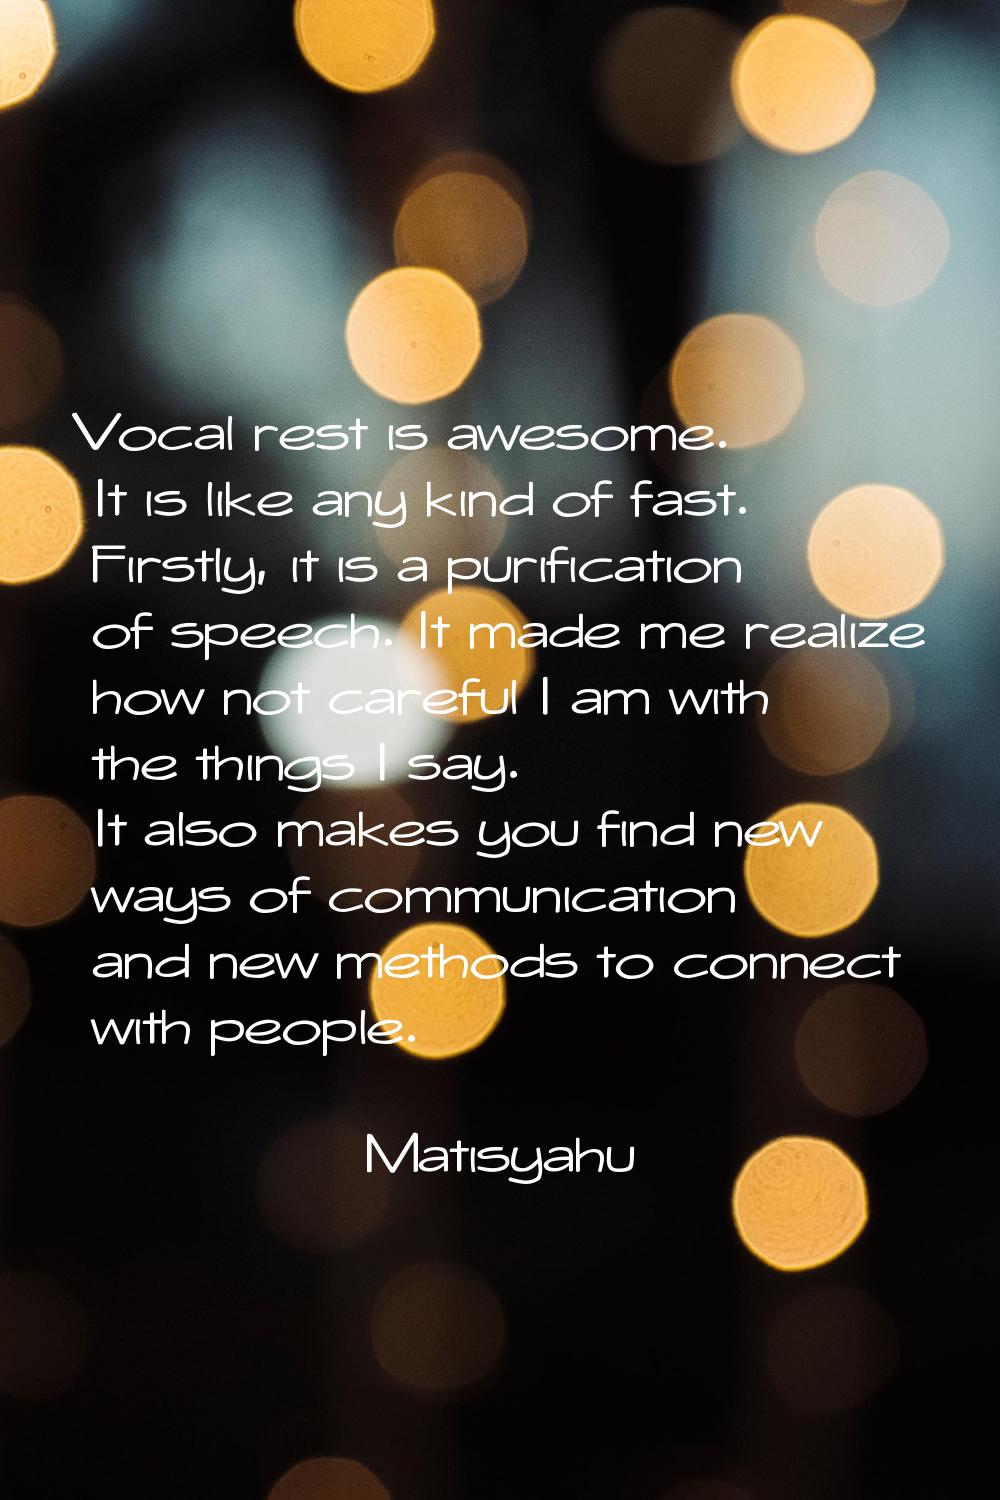 Vocal rest is awesome. It is like any kind of fast. Firstly, it is a purification of speech. It mad